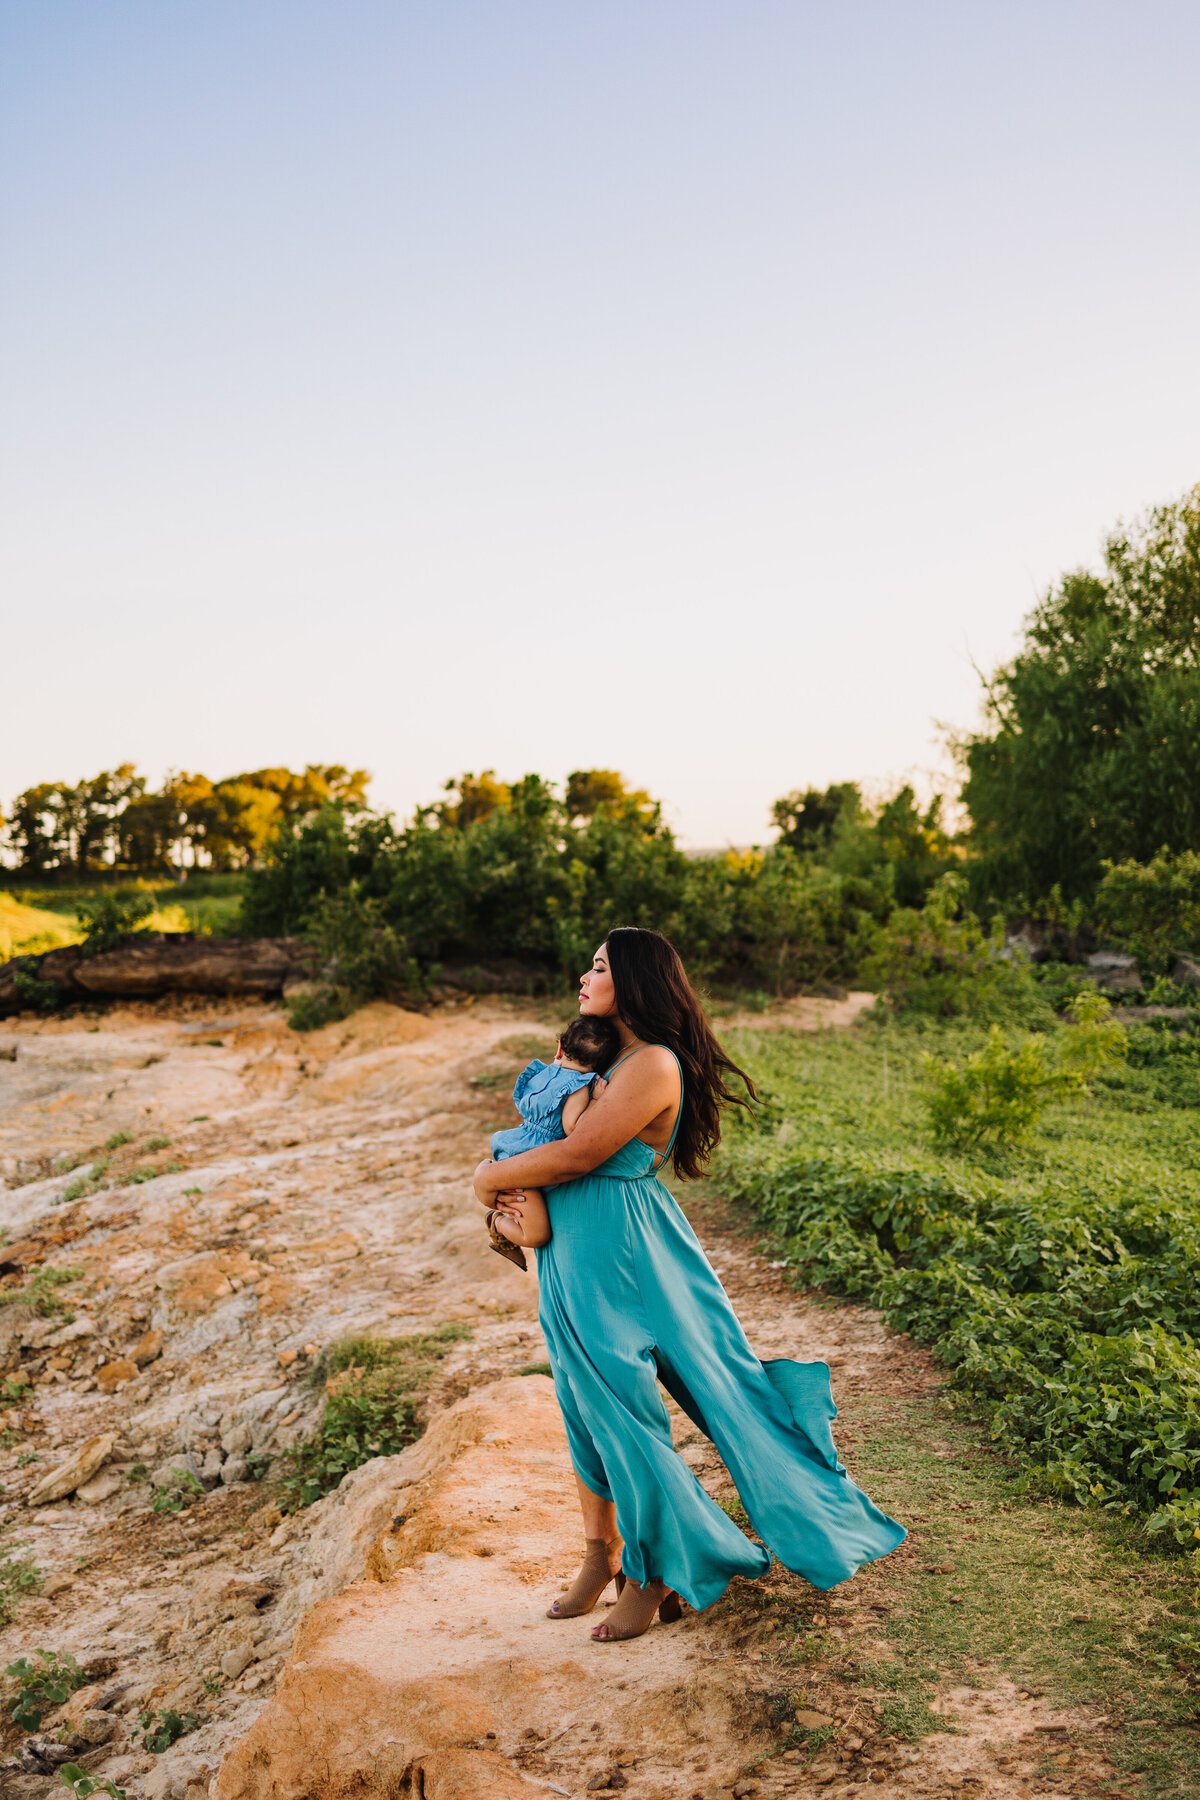 Photo of a woman in an aquamarine dress carrying a baby in her arms. She is in profile and with her eyes closed, she is standing on some rocks and behind her there are some green trees